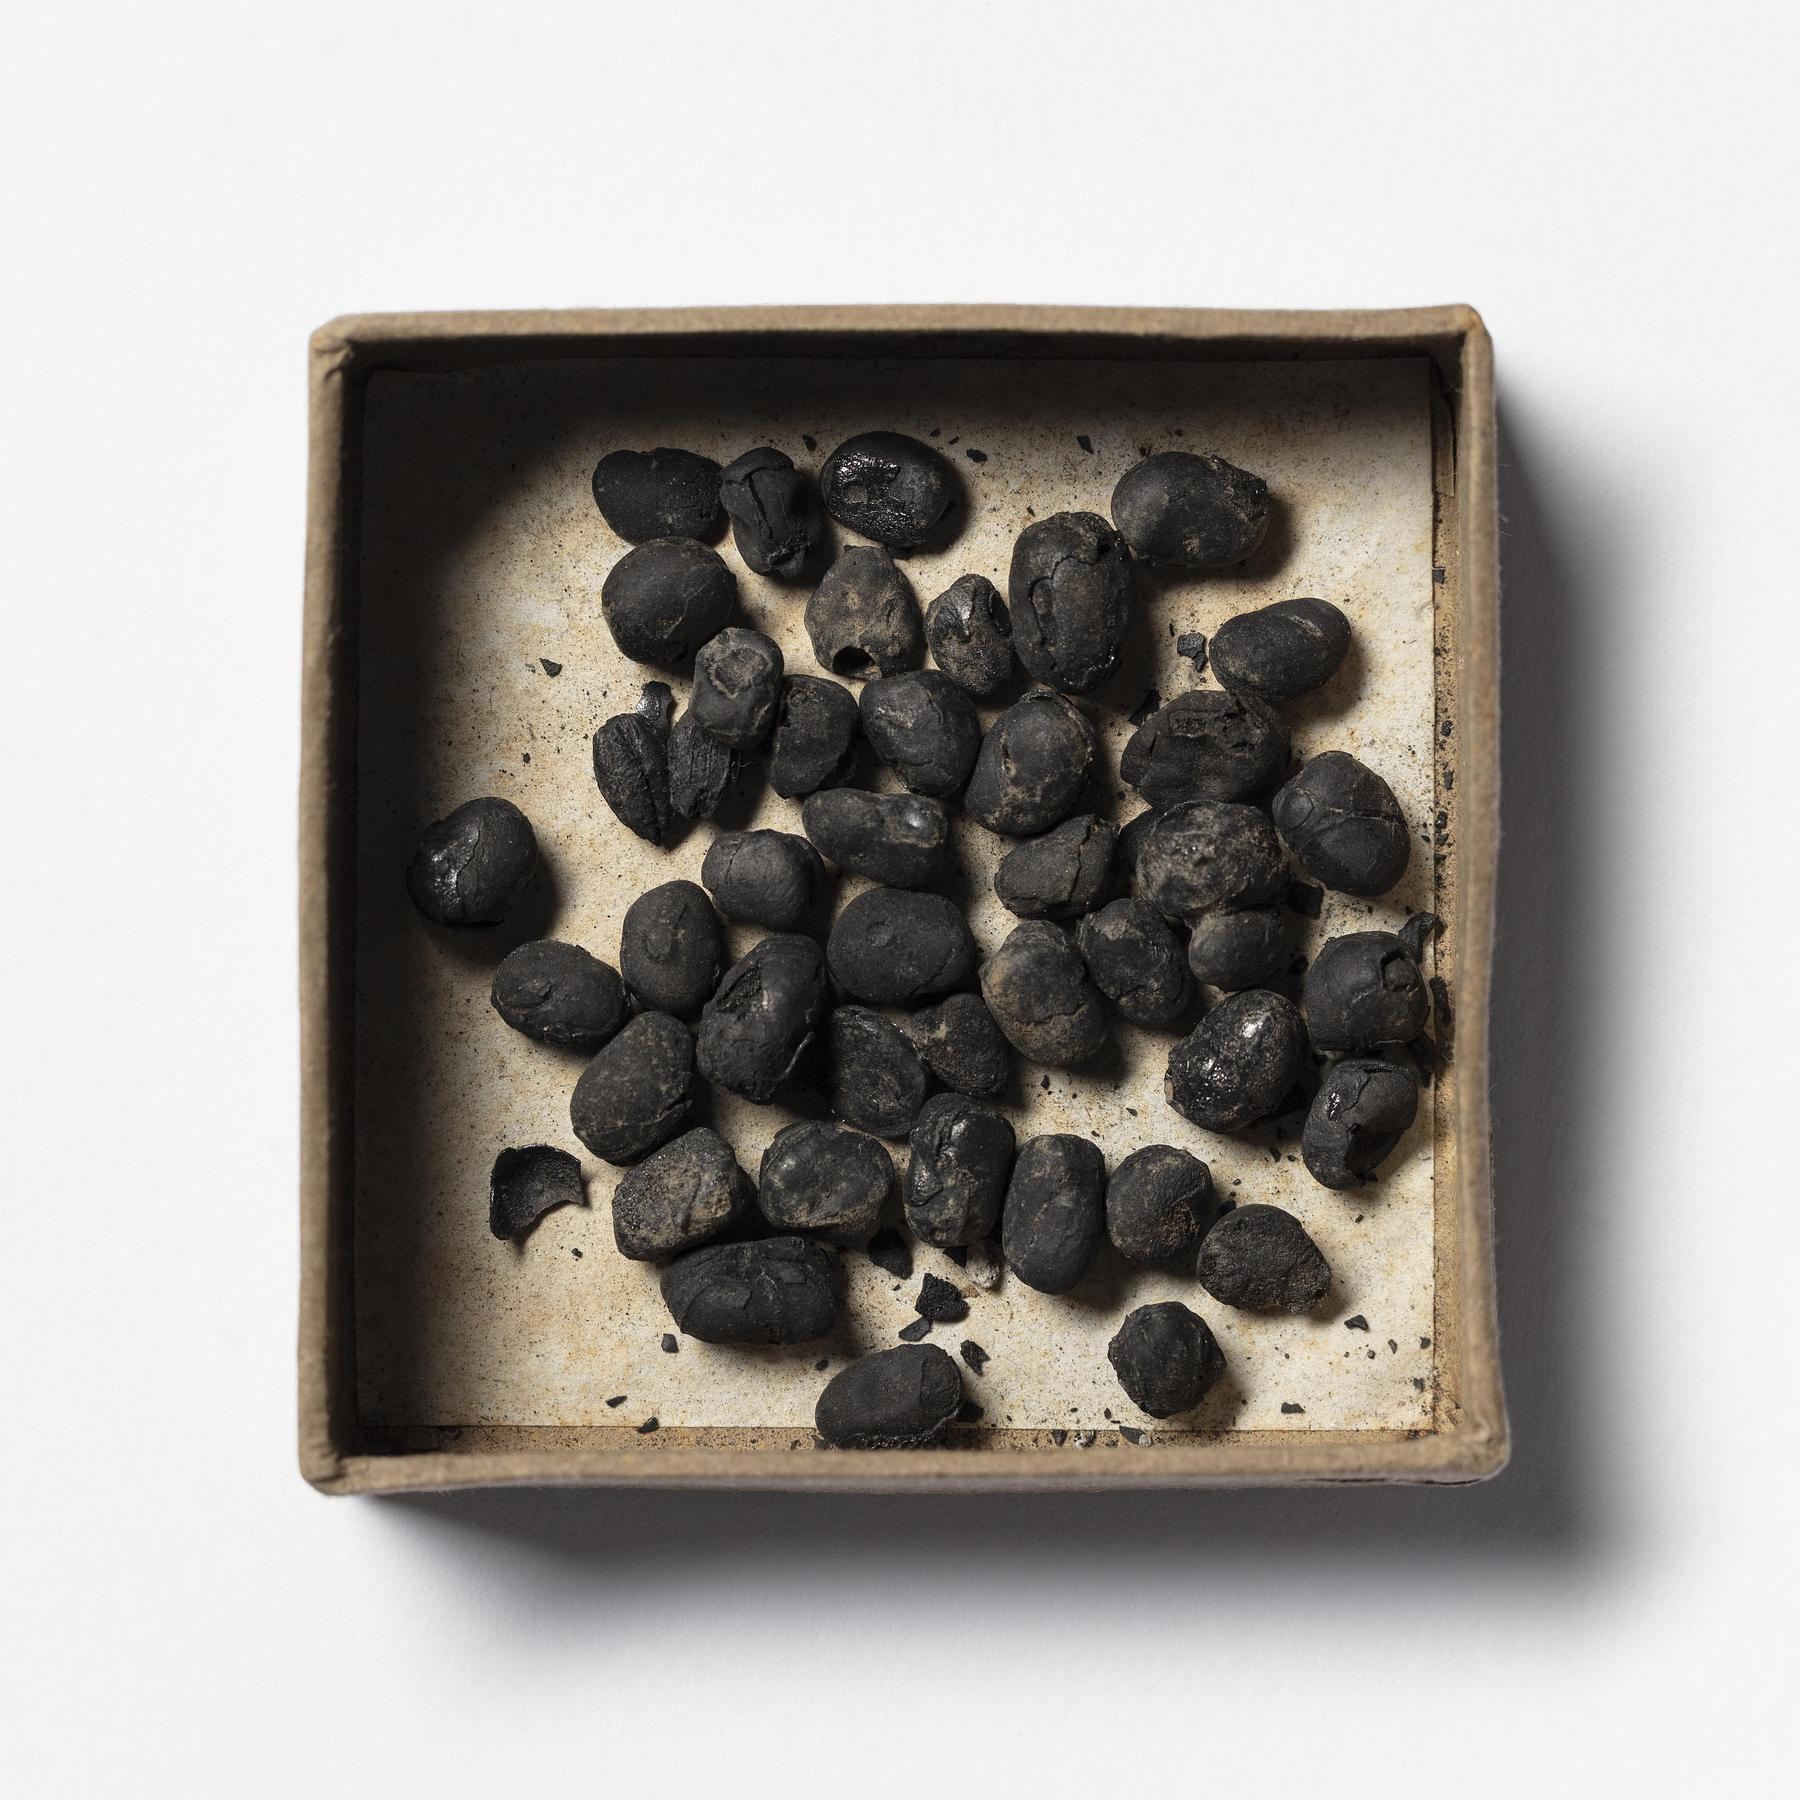 Carbonized beans from Pompeii, H3403